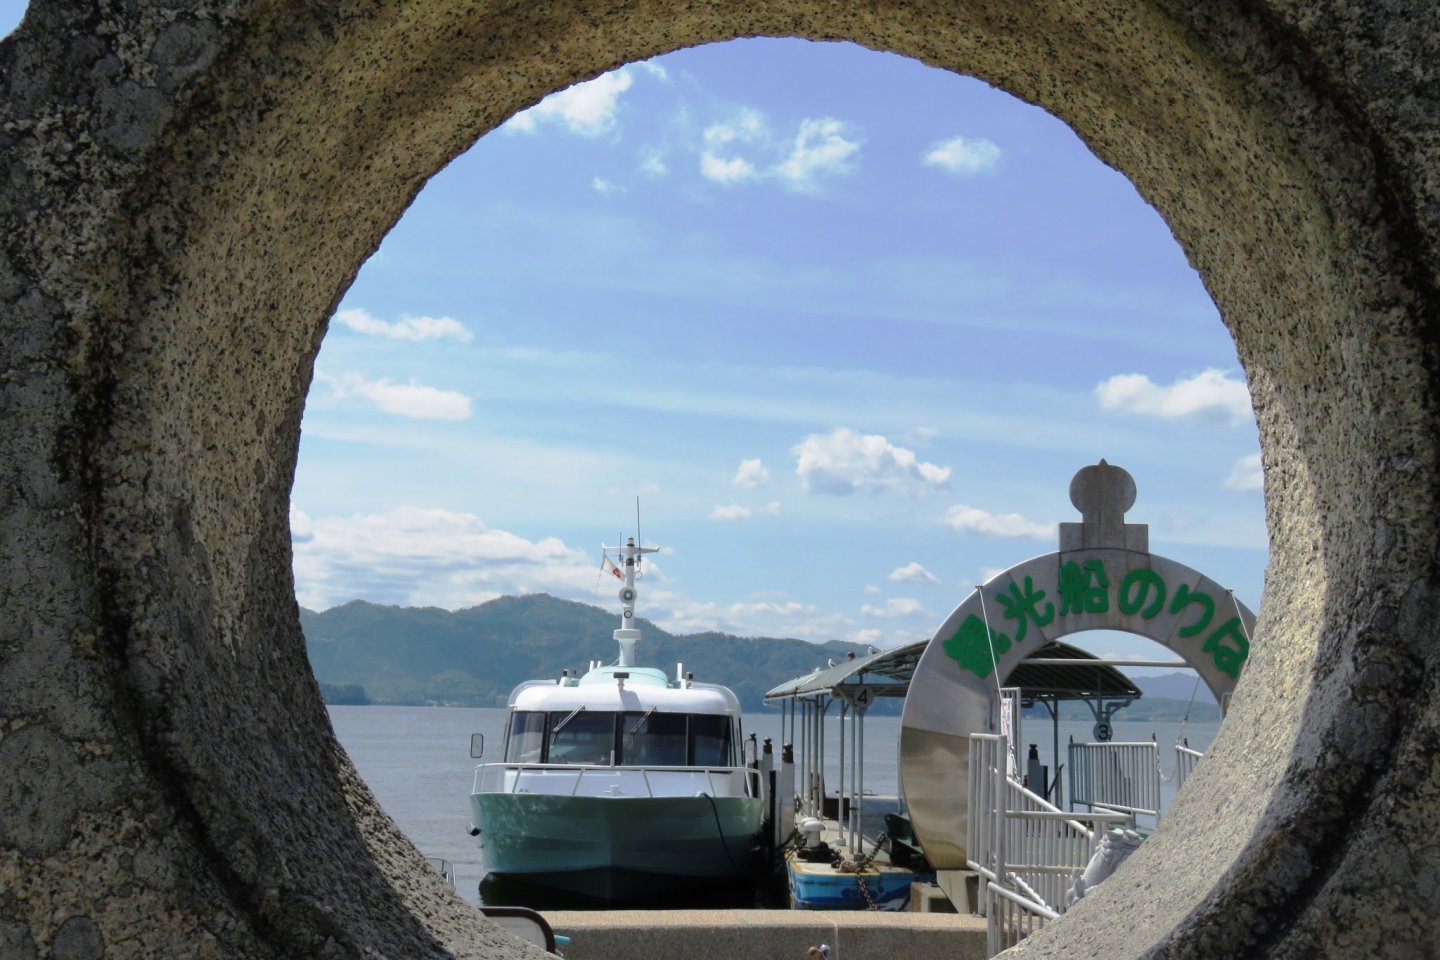 The journey to this secret shrine starts with a boat ride from Amanohashidate